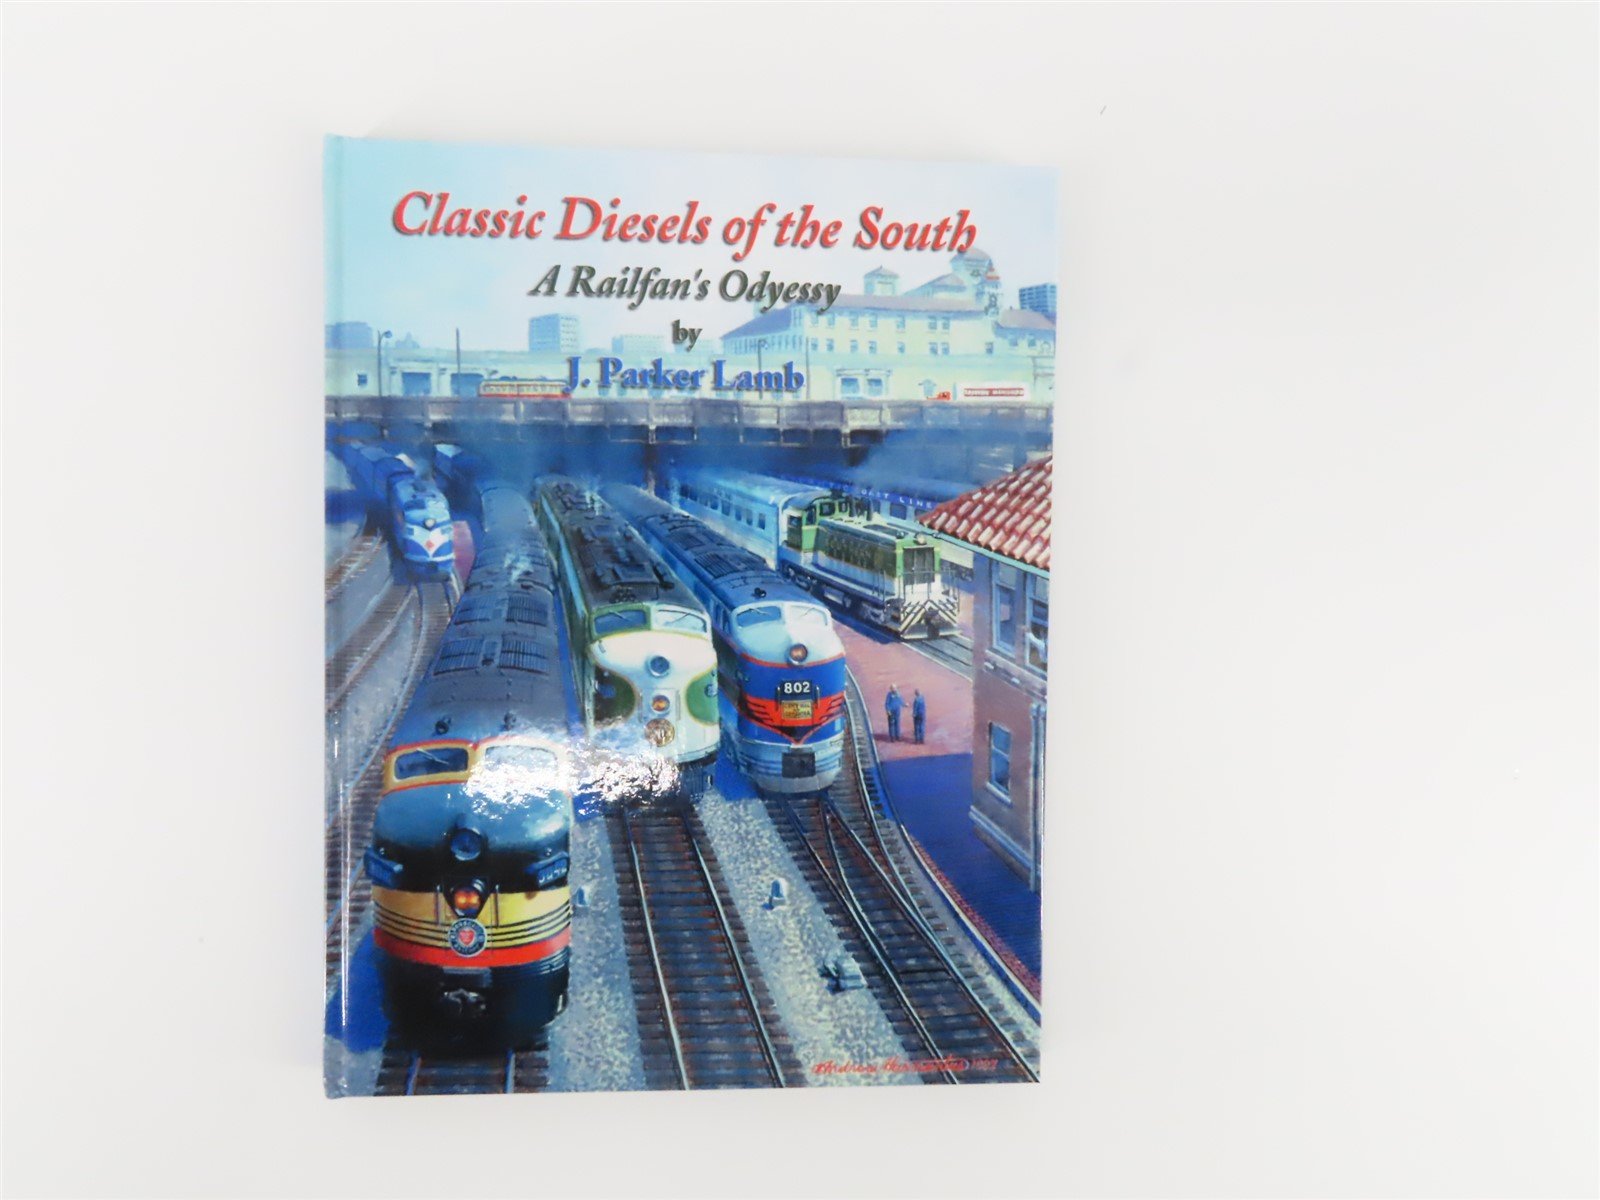 Classic Diesels of the South - A Railfan's Odyssey by J. Parker Lamb ©1997 Book